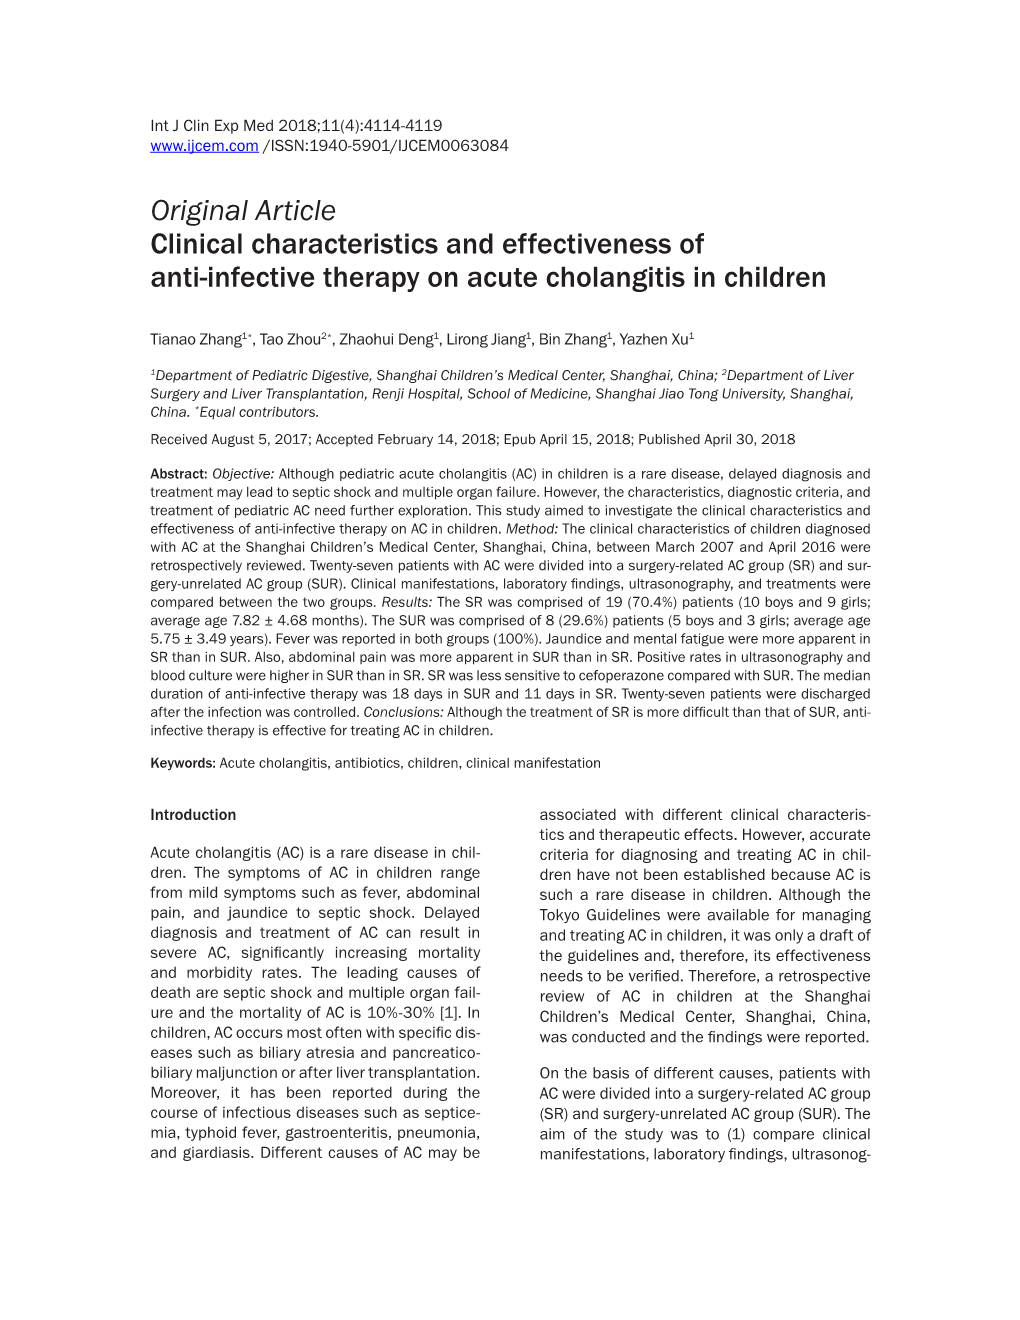 Original Article Clinical Characteristics and Effectiveness of Anti-Infective Therapy on Acute Cholangitis in Children